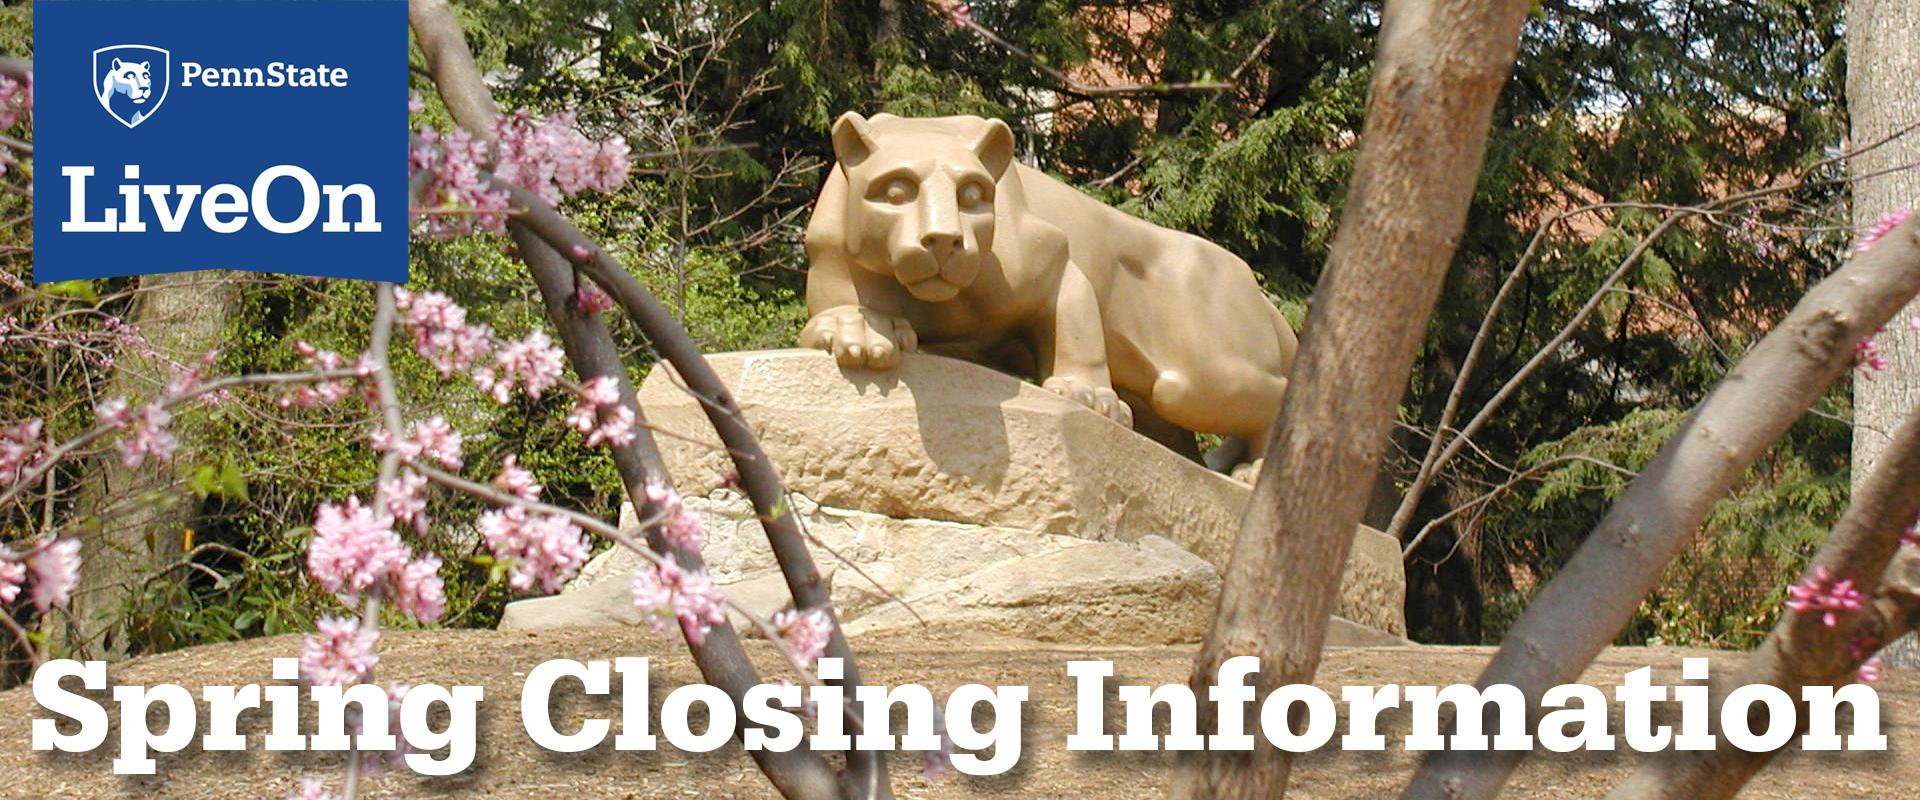 Nittany Lion Shrine with LiveOn badge and text "Spring Closing Information"